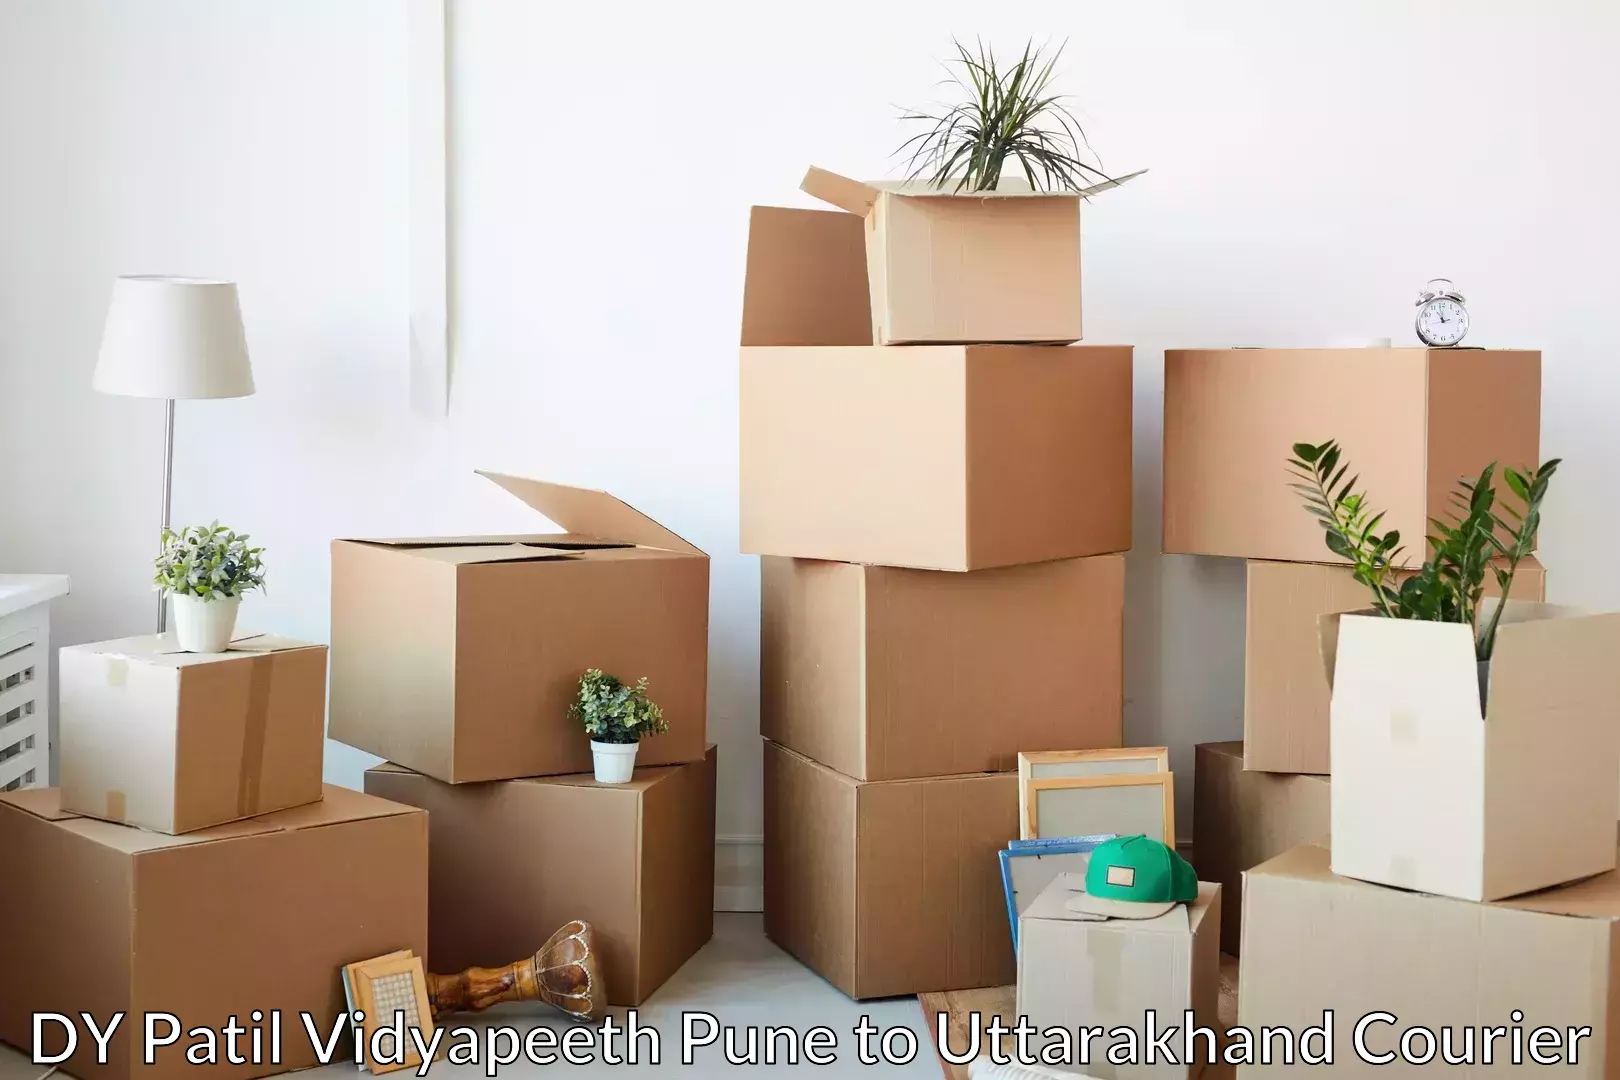 Stress-free moving DY Patil Vidyapeeth Pune to IIT Roorkee